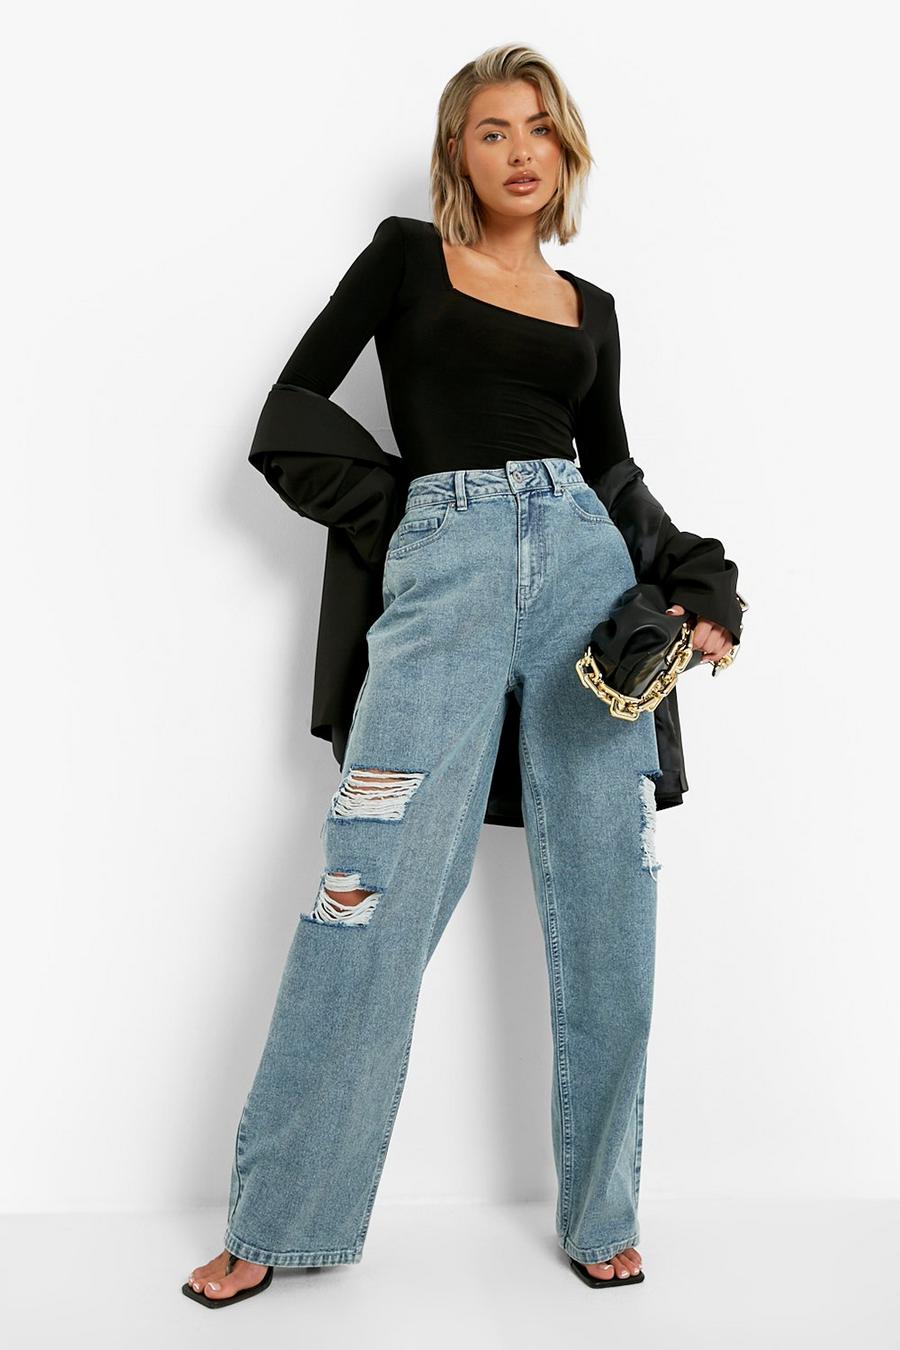 Out of date Riot canvas Ripped High Waisted Dad Jeans | boohoo